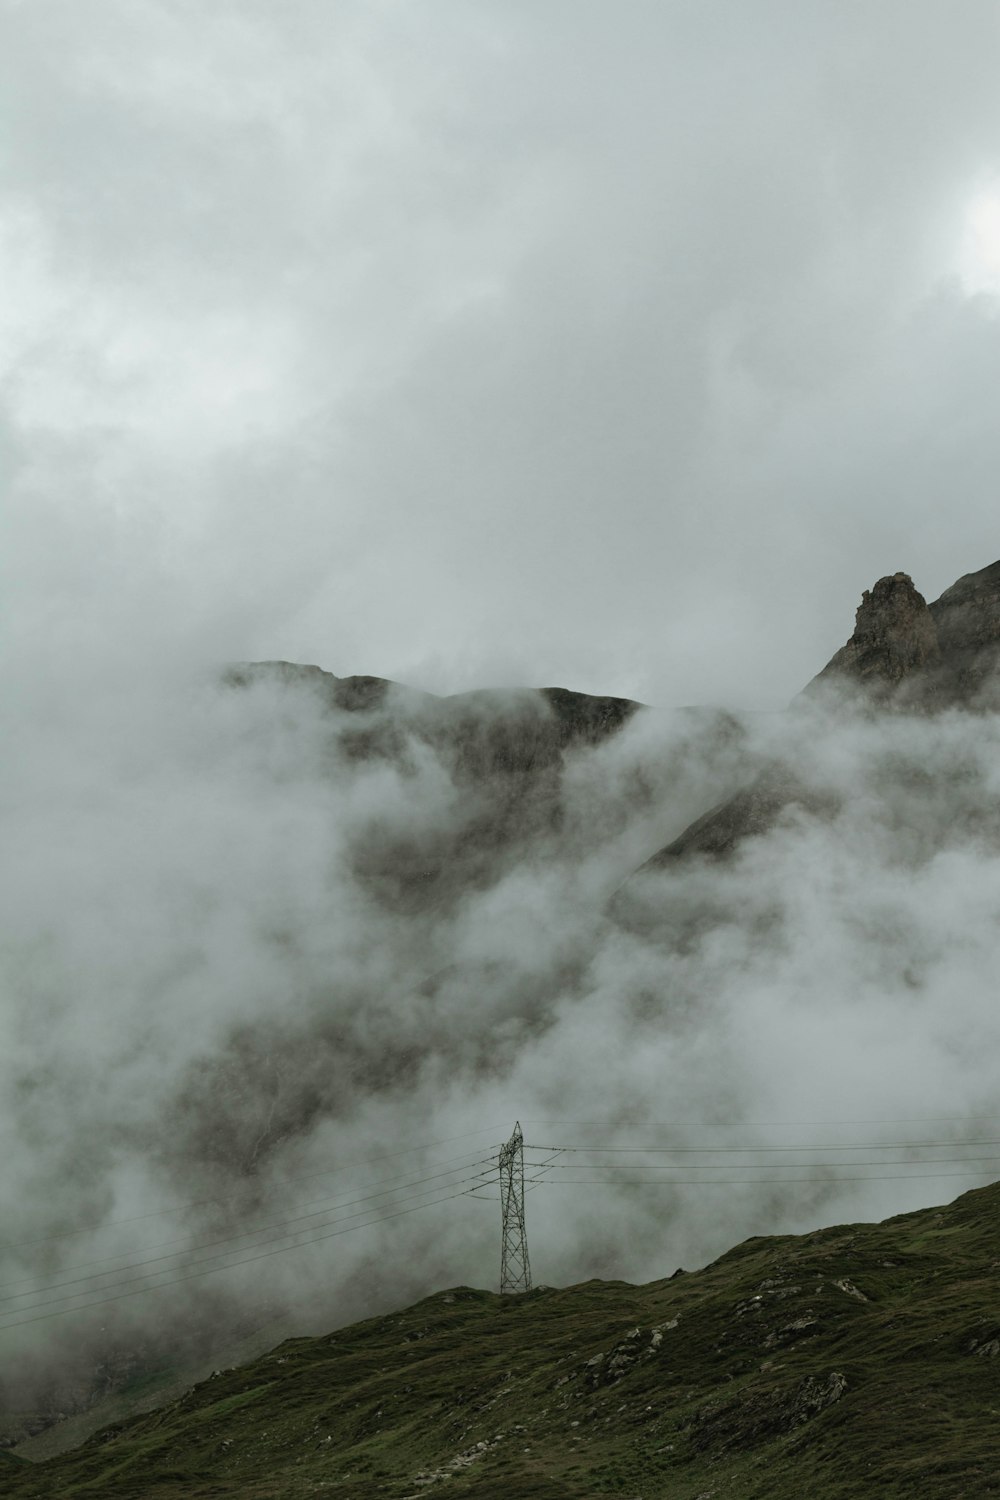 a mountain covered in fog with a telephone pole in the foreground